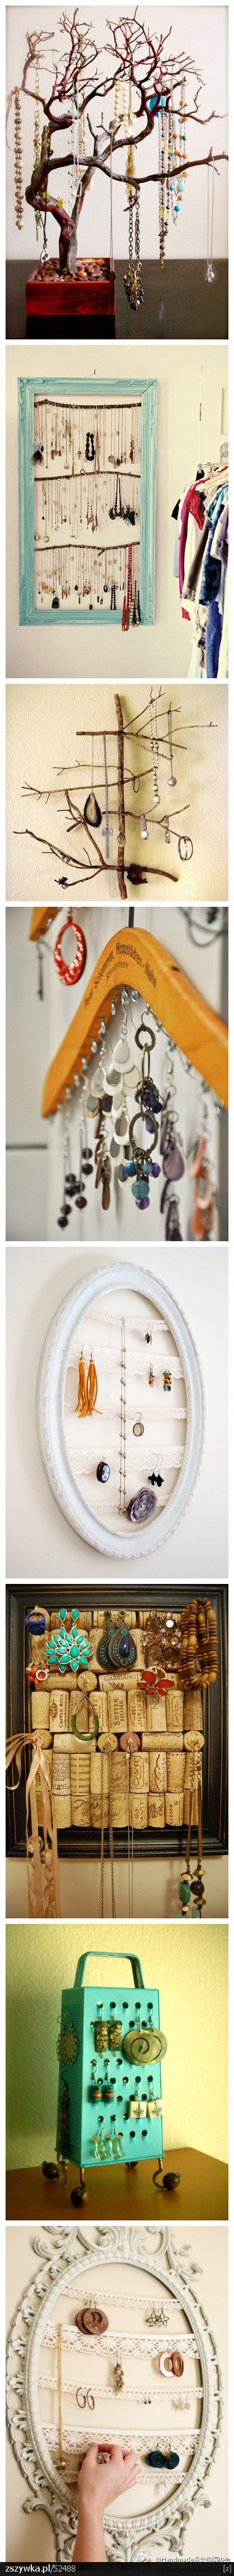 Jewelry hangers. Love these! (sorry for taking up your feed)